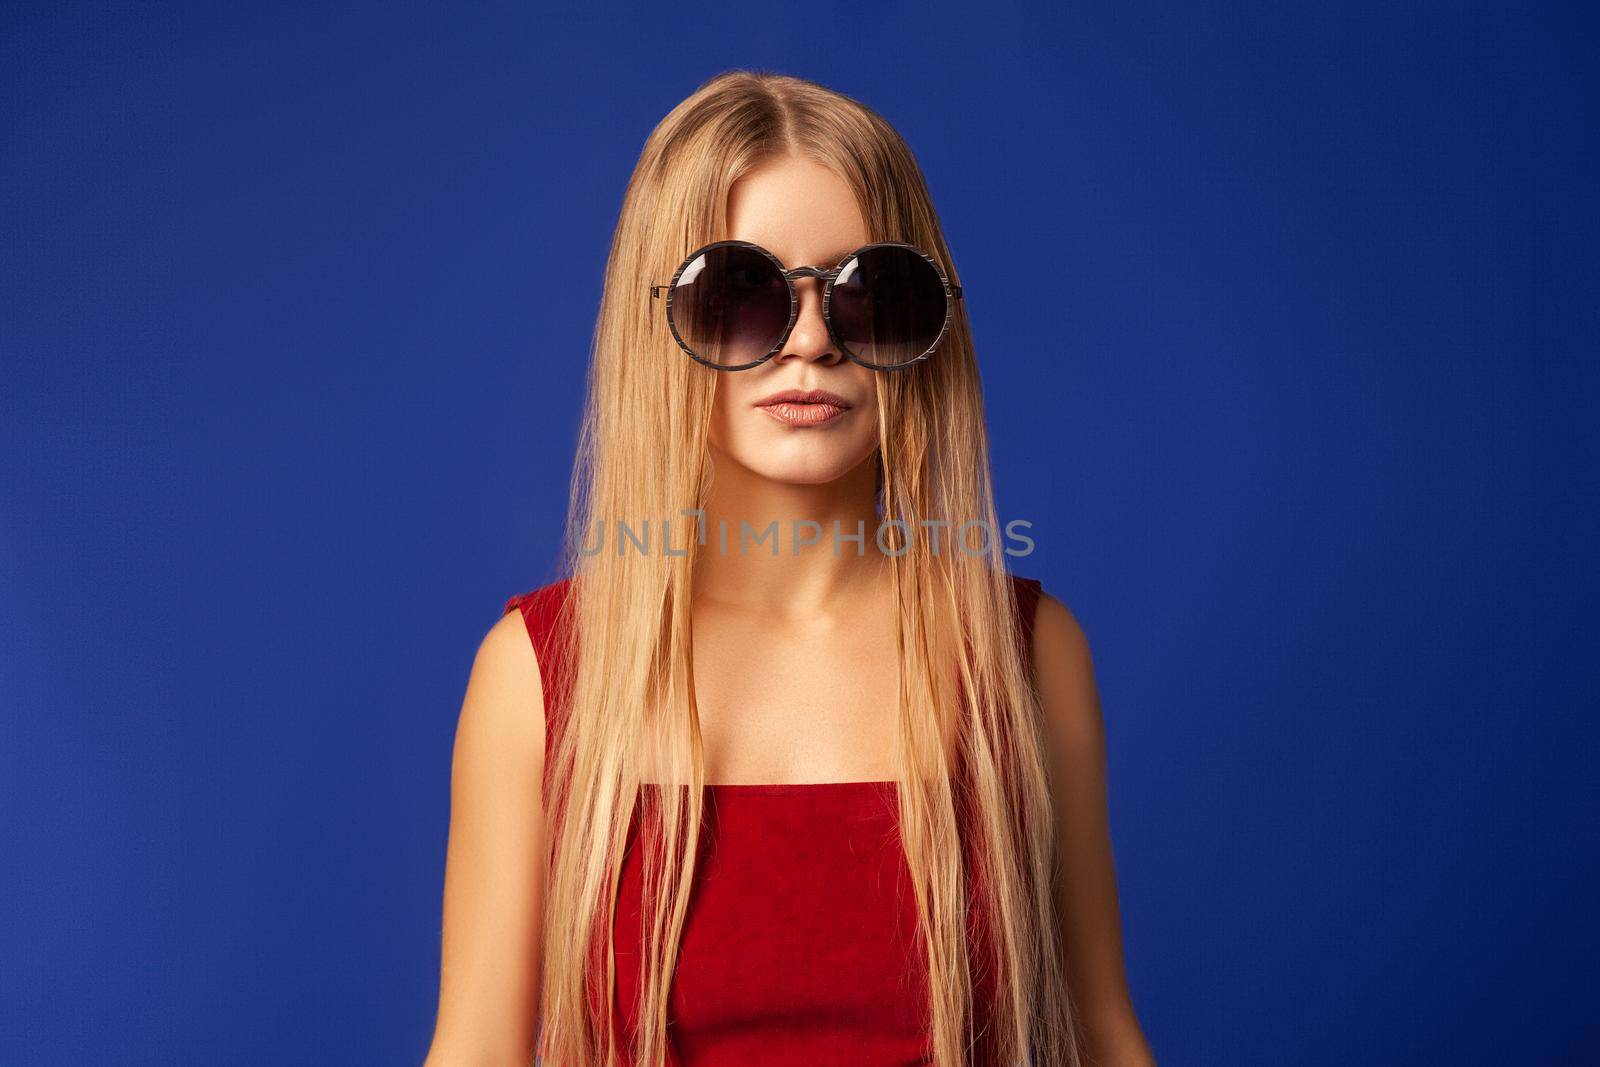 Young female model with long blond hair wearing stylish sunglasses against blue background